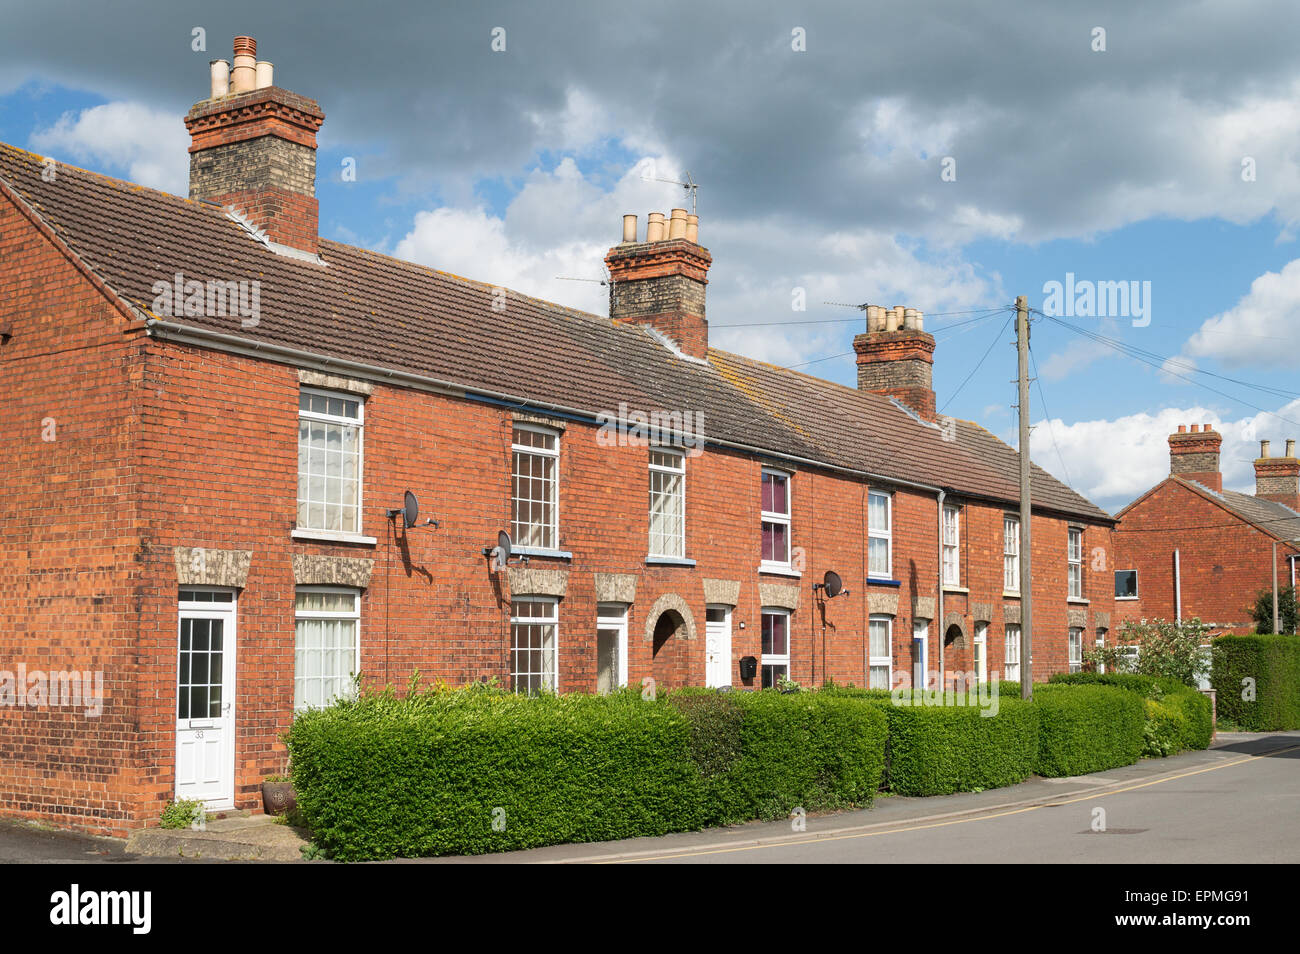 Brick built terrace of houses Spilsby, Lincolnshire, England, UK Stock Photo